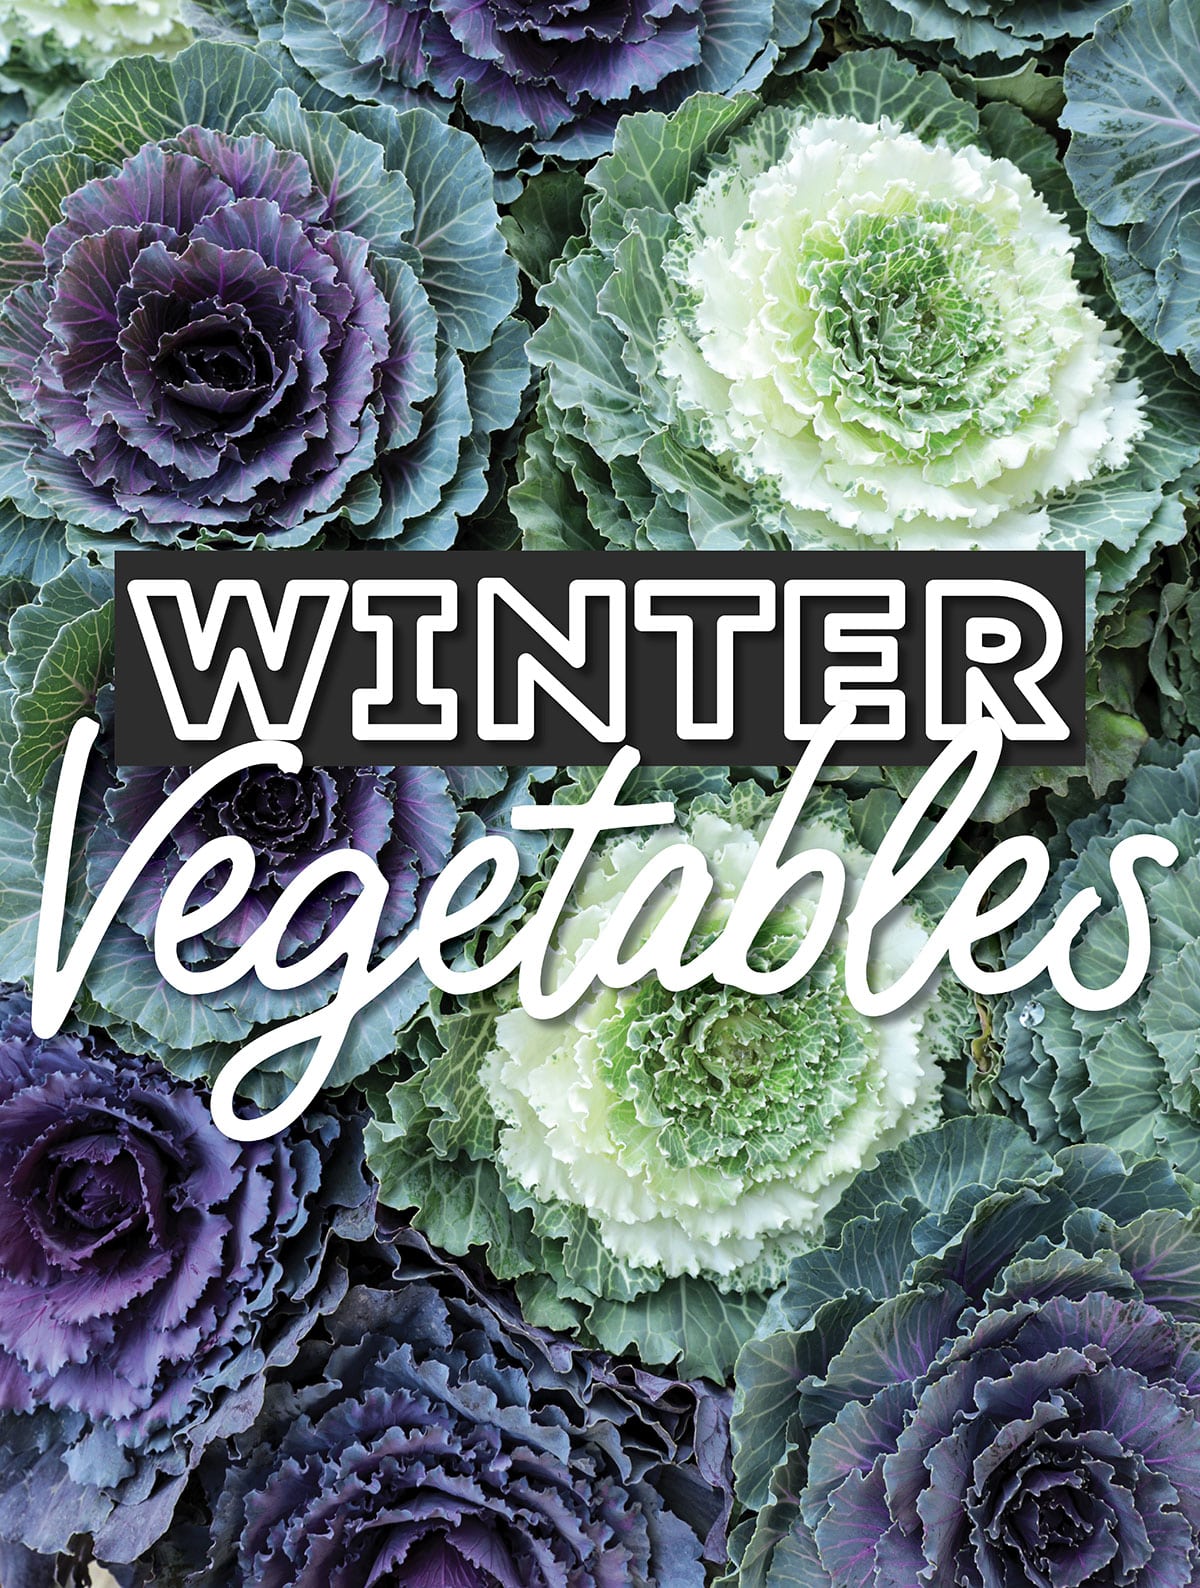 Collage that says "winter vegetables".